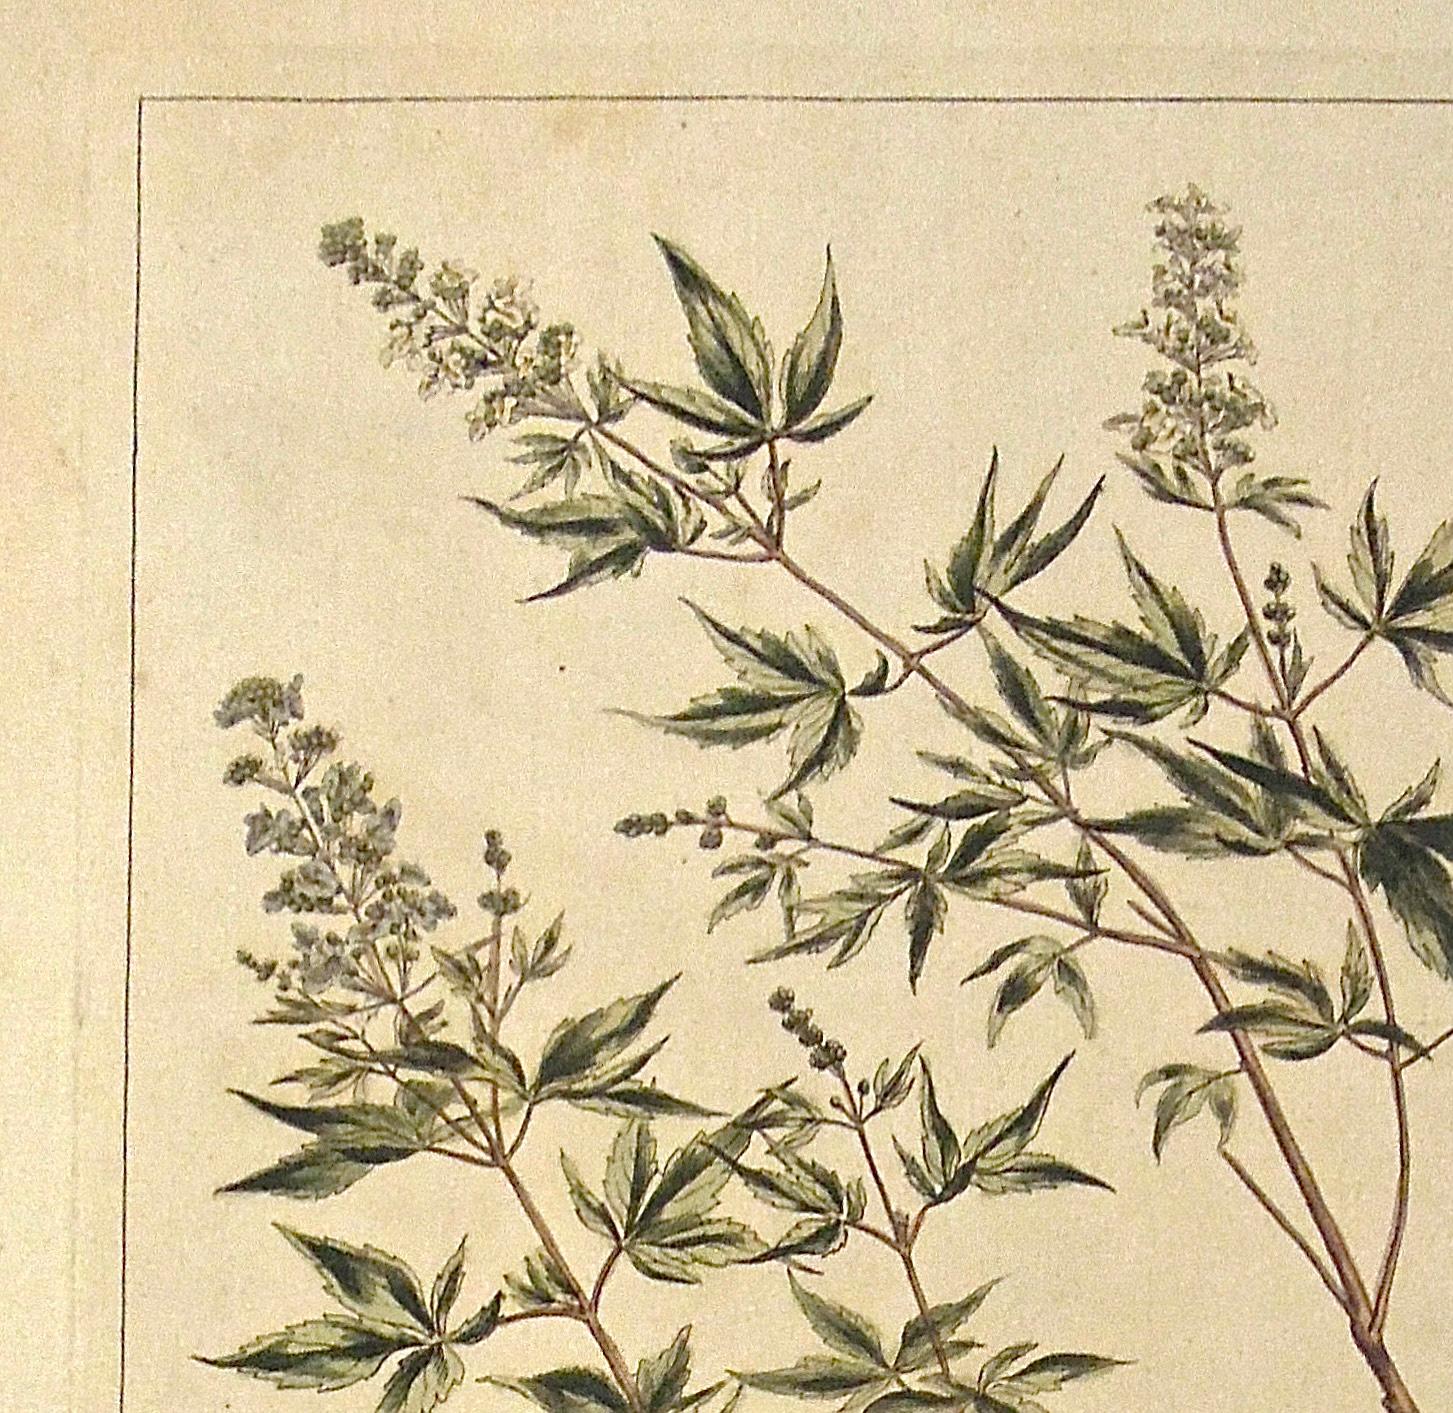 Vitex.
Upper Right: CCLXXV. Lower Left: I. Miller. Delin. et. Sculp. Lower Center: Publish'd according to Act by Parliament by P. Miller. December 22, 1758.
Author: Philip Miller
Source / Publication: The Gardener's Dictionary
Publisher: Printed for